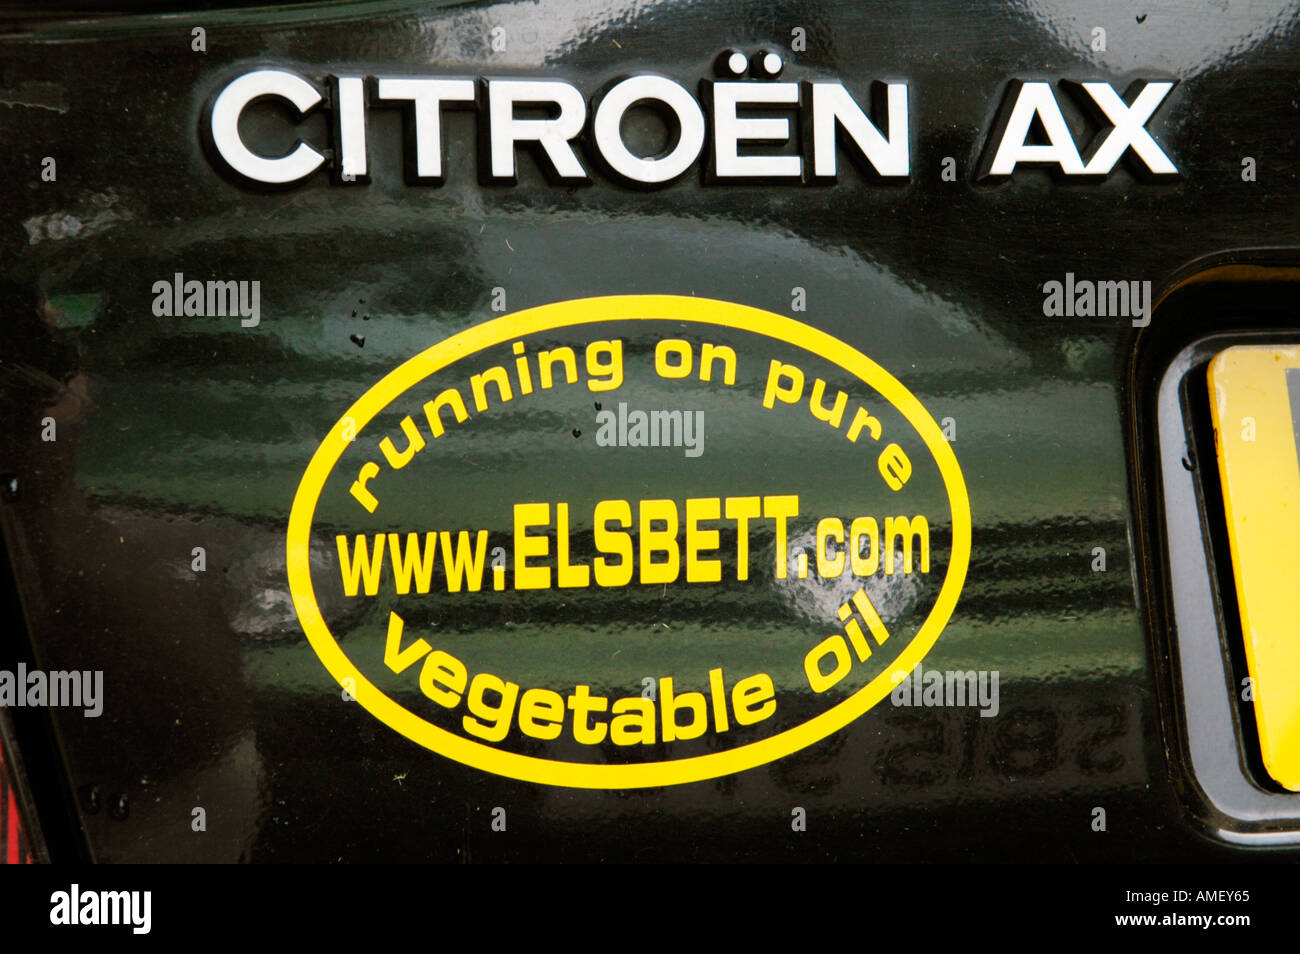 Sticker on a car promoting running diesel cars on vegetable oil Stock Photo